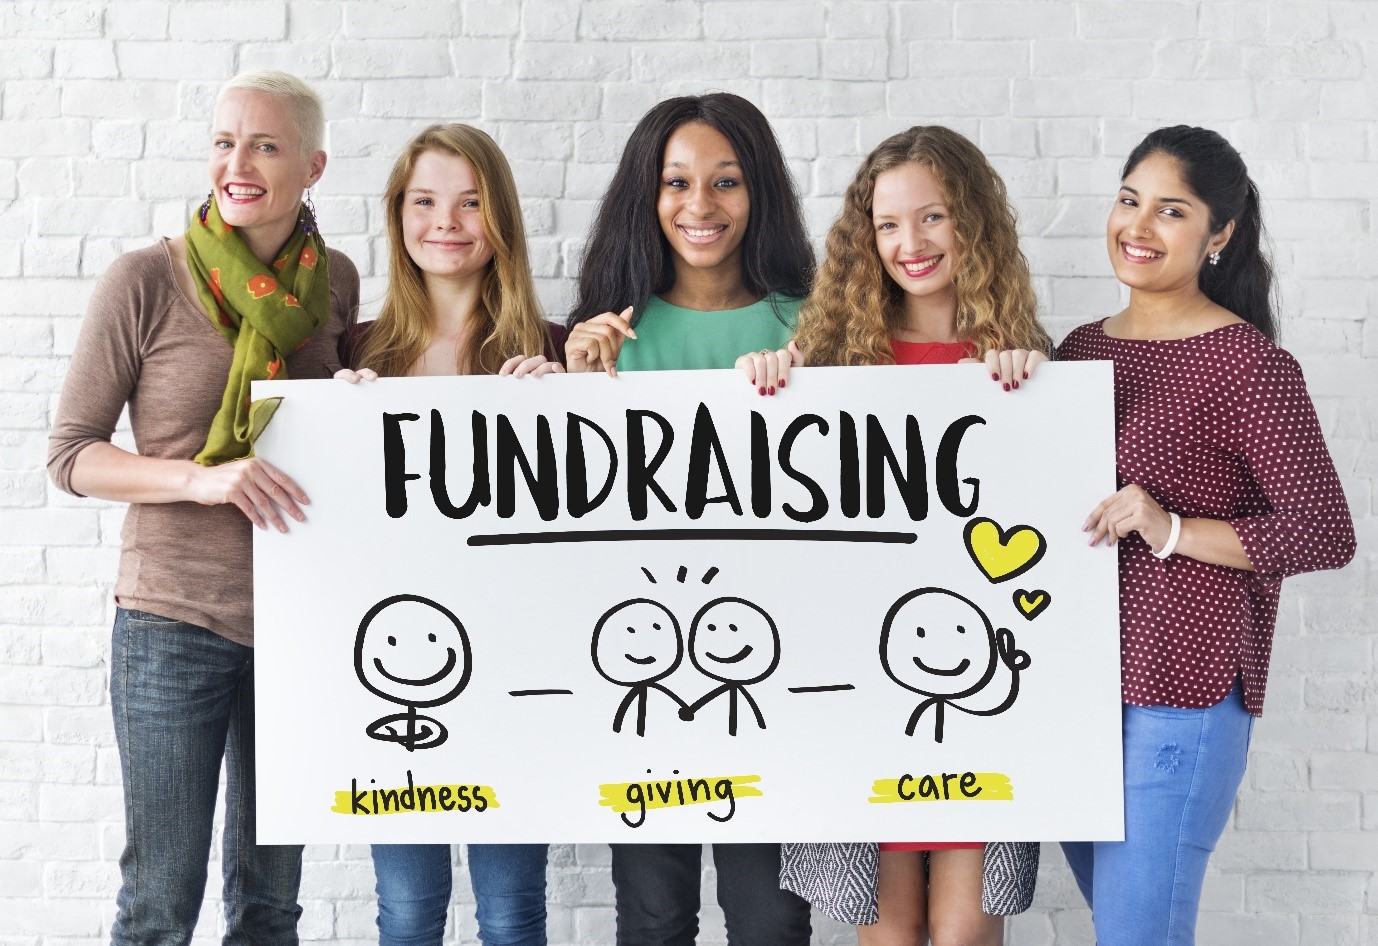 A Path to Becoming a Successful Fundraiser